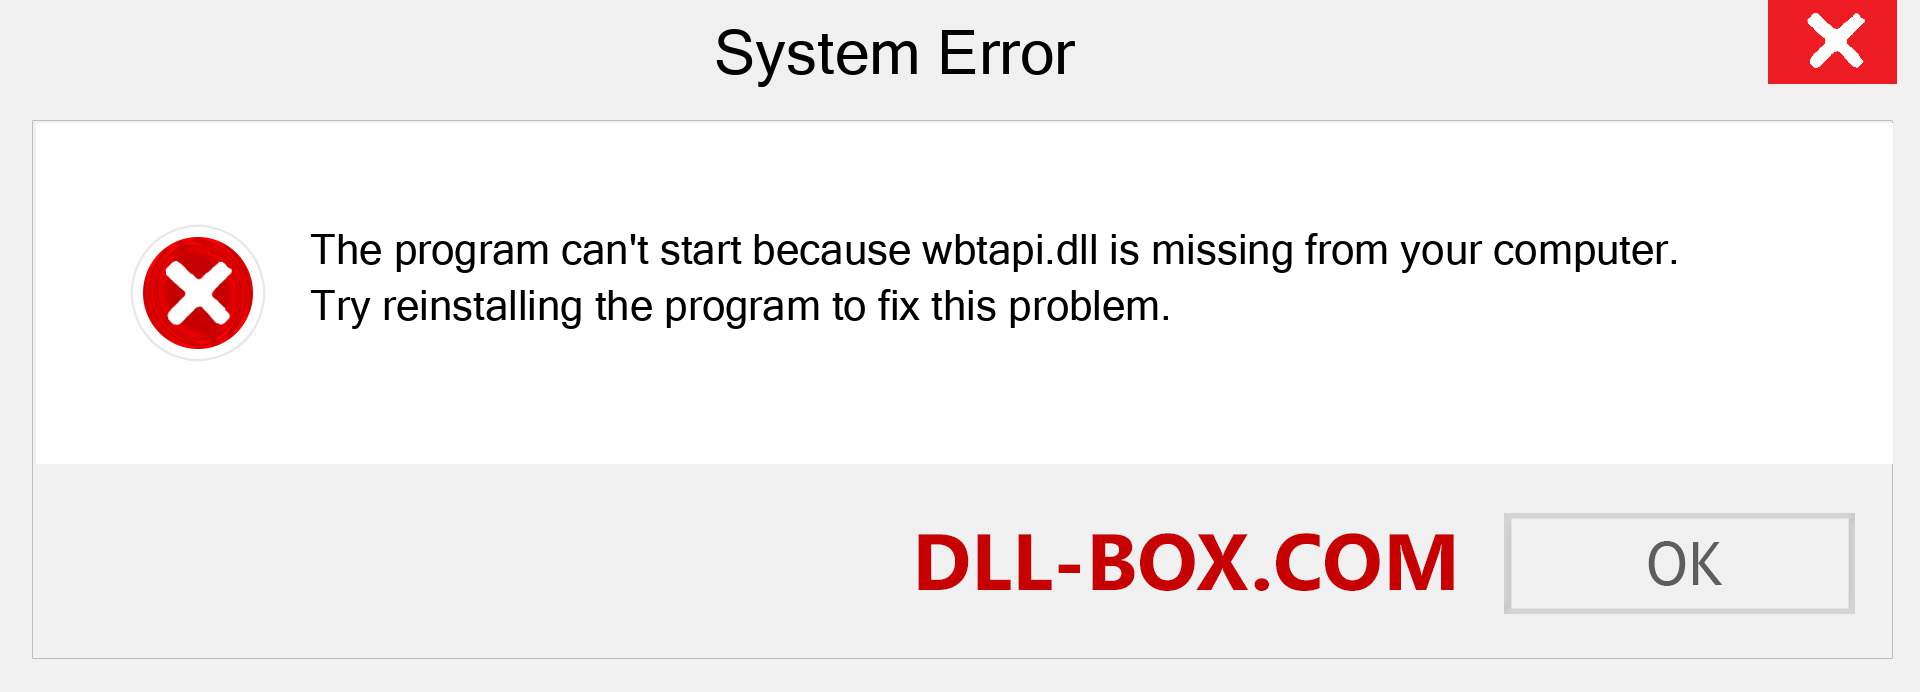  wbtapi.dll file is missing?. Download for Windows 7, 8, 10 - Fix  wbtapi dll Missing Error on Windows, photos, images